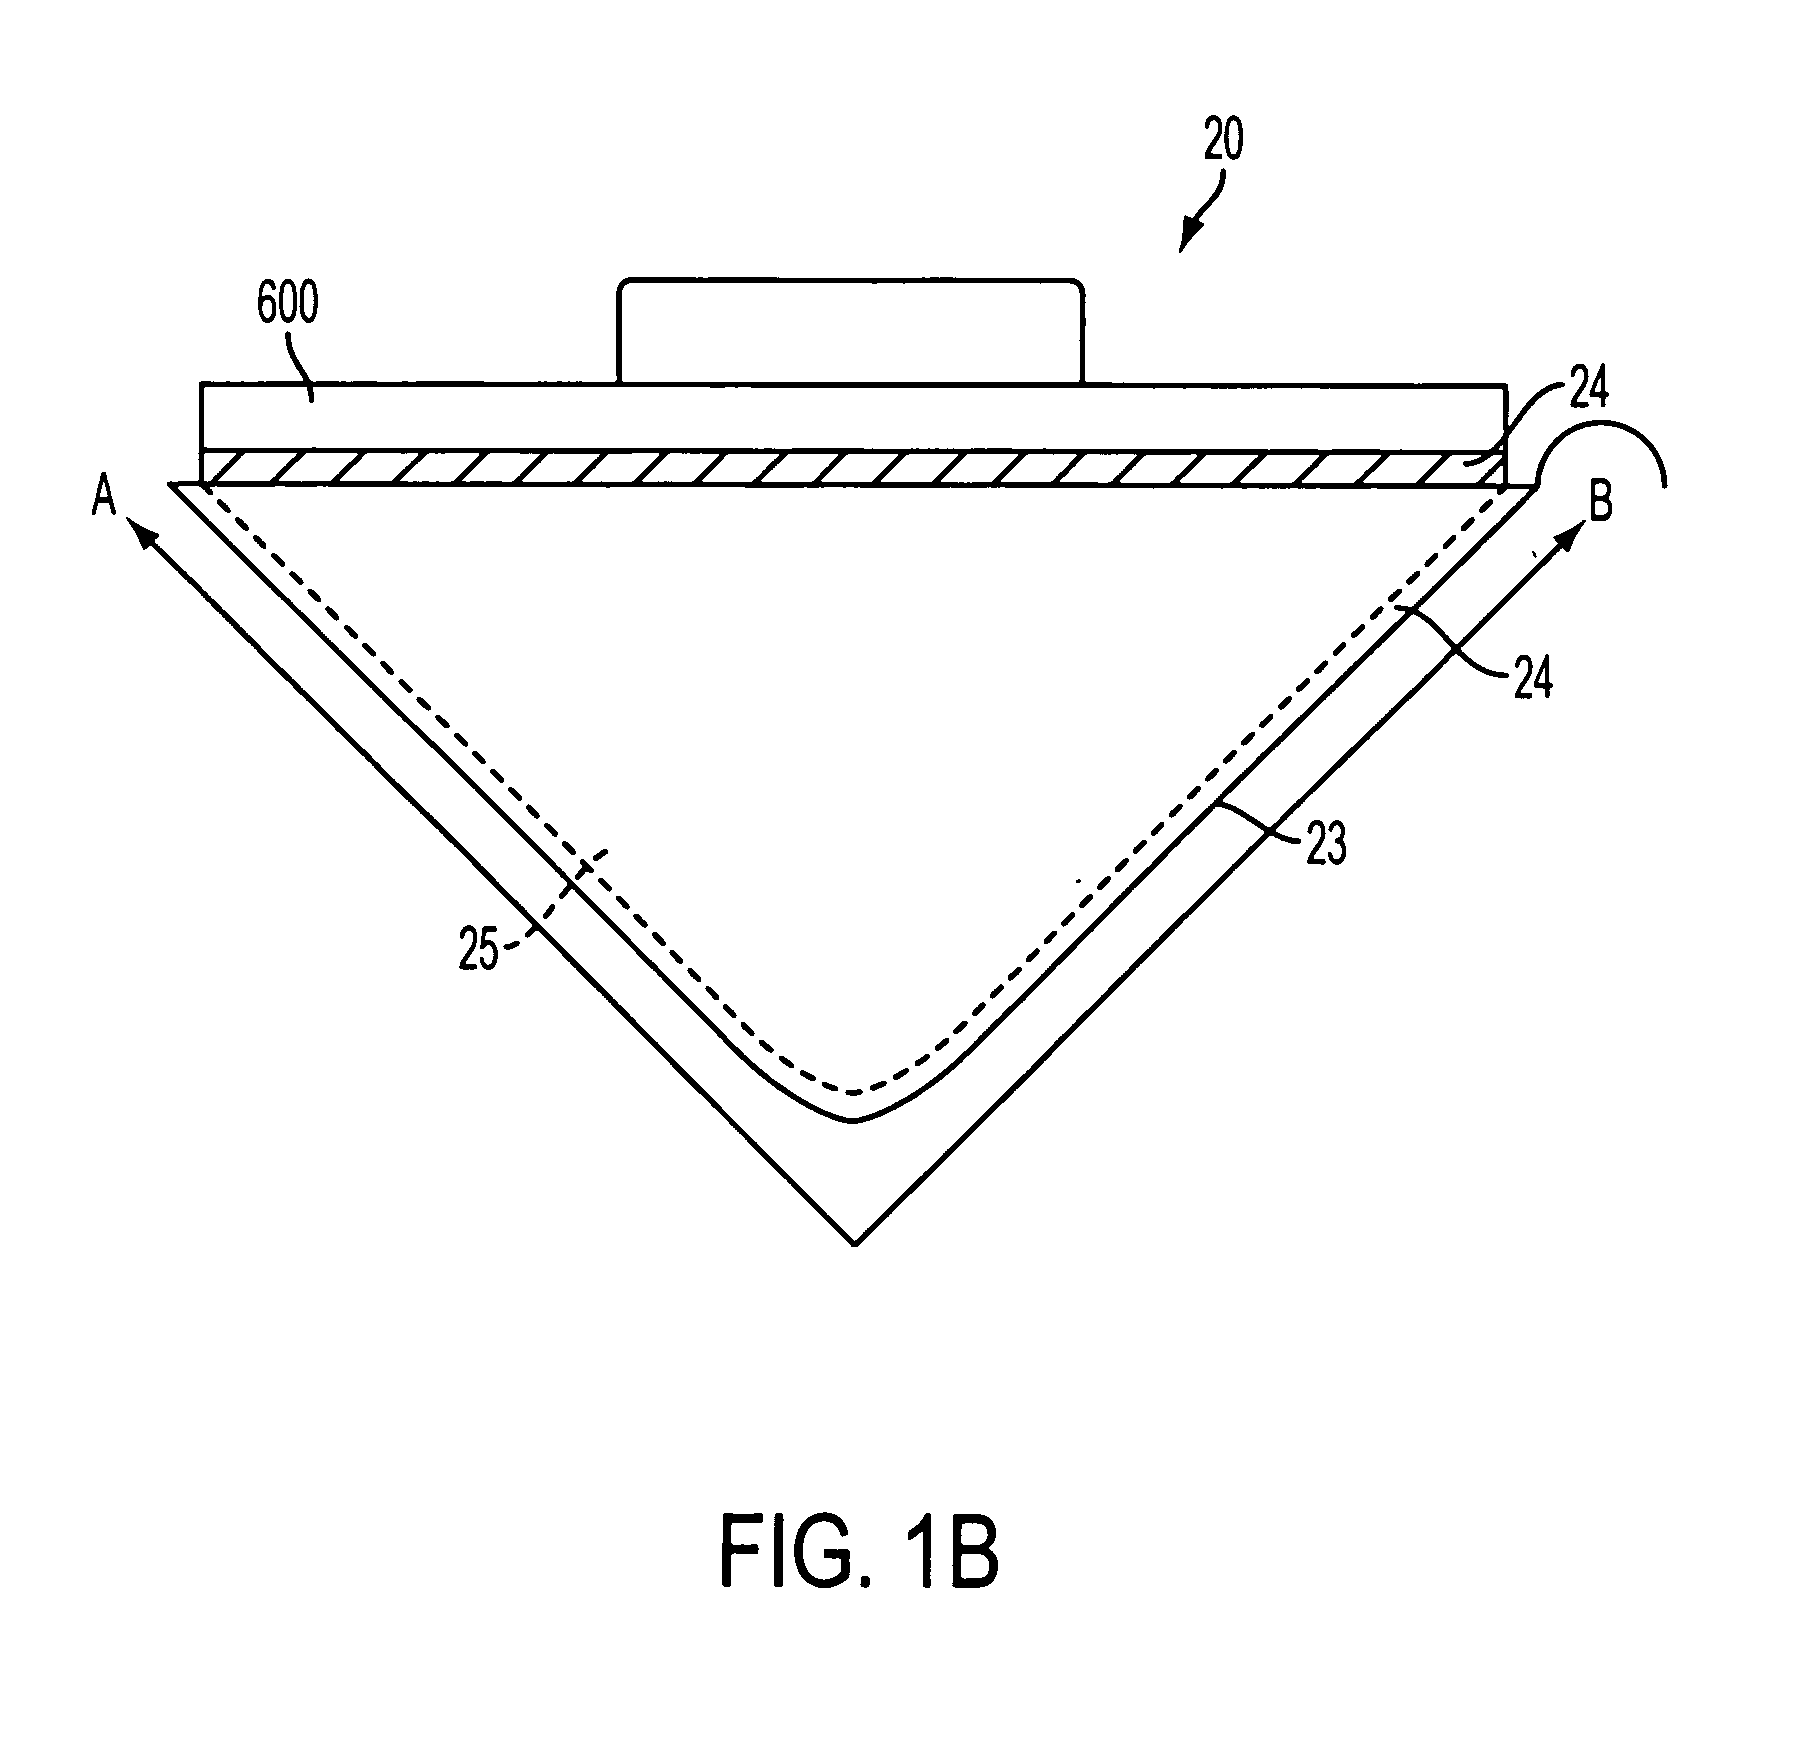 Methods and apparatuses for filtering water